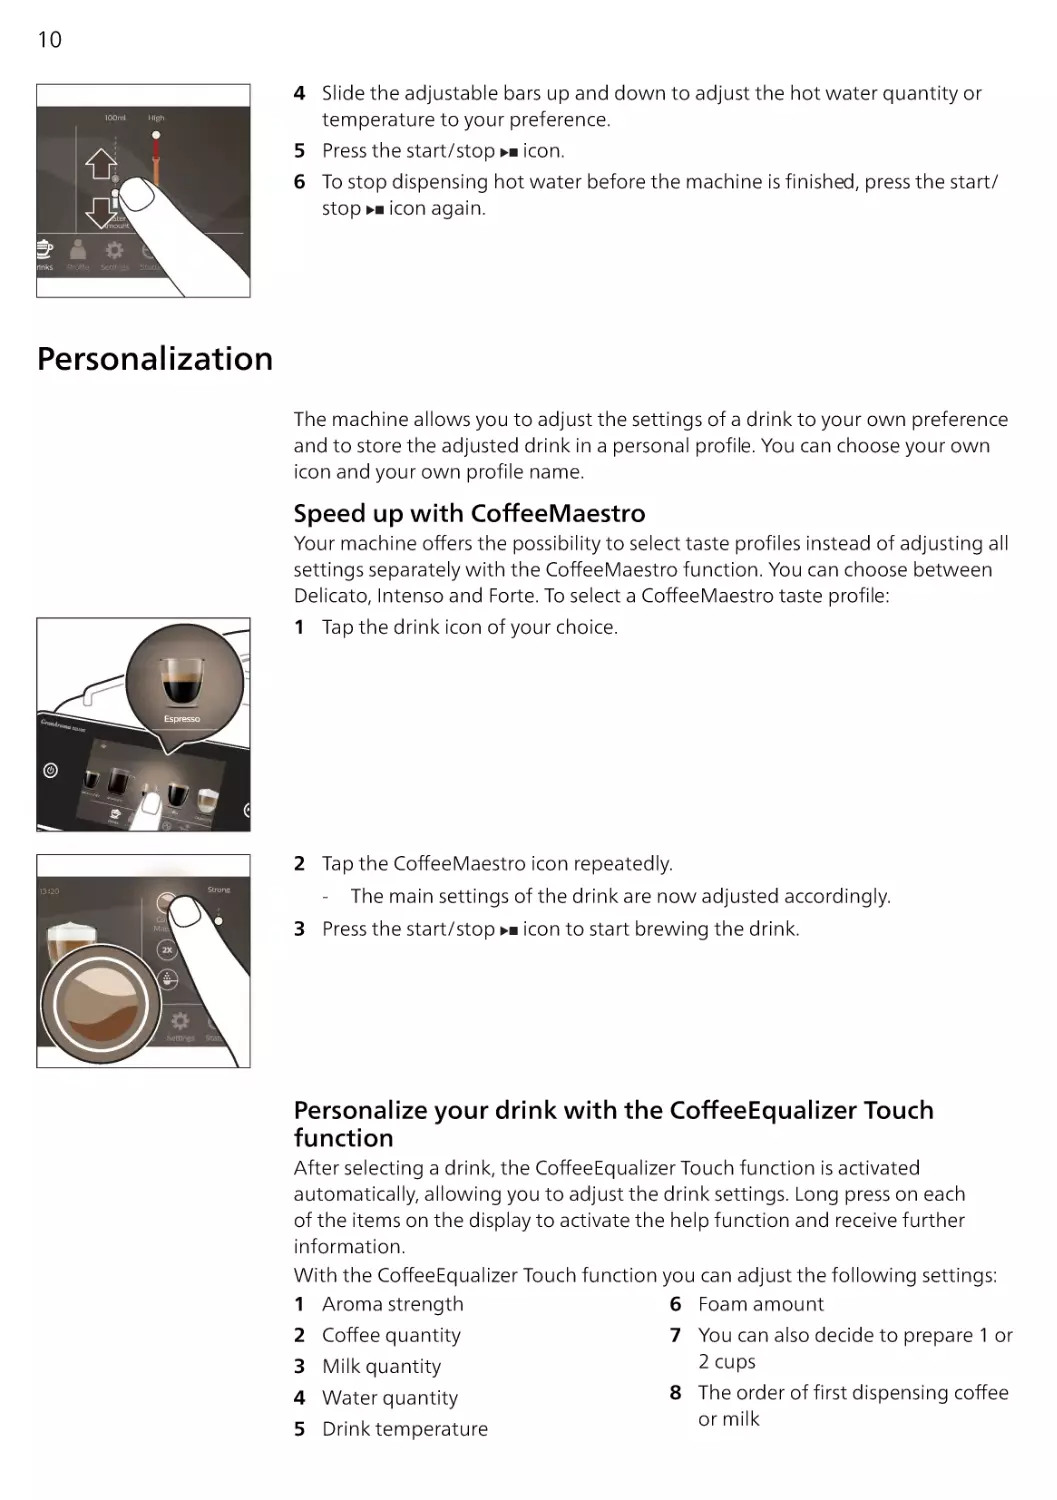 Personalization
Speed up with CoffeeMaestro
Personalize your drink with the CoffeeEqualizer Touch function